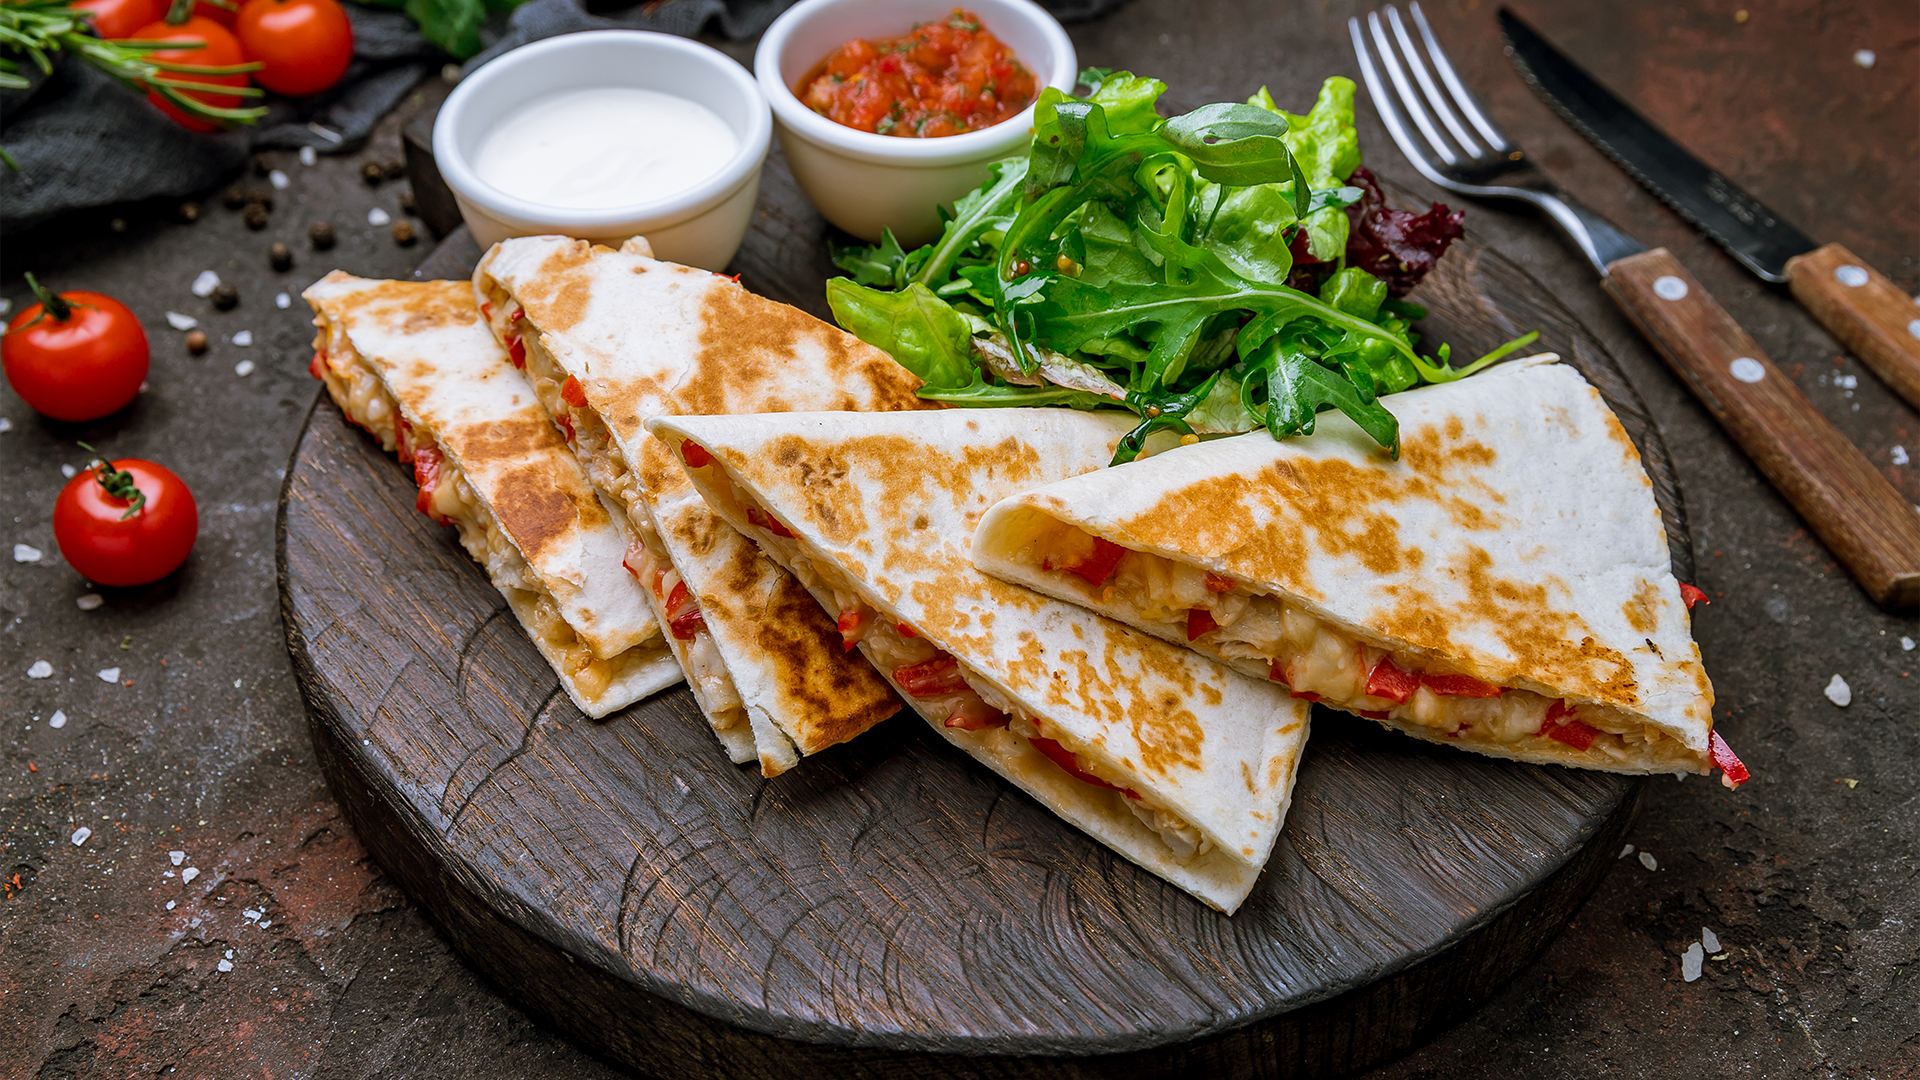 Spicy chicken and vegetable quesadillas